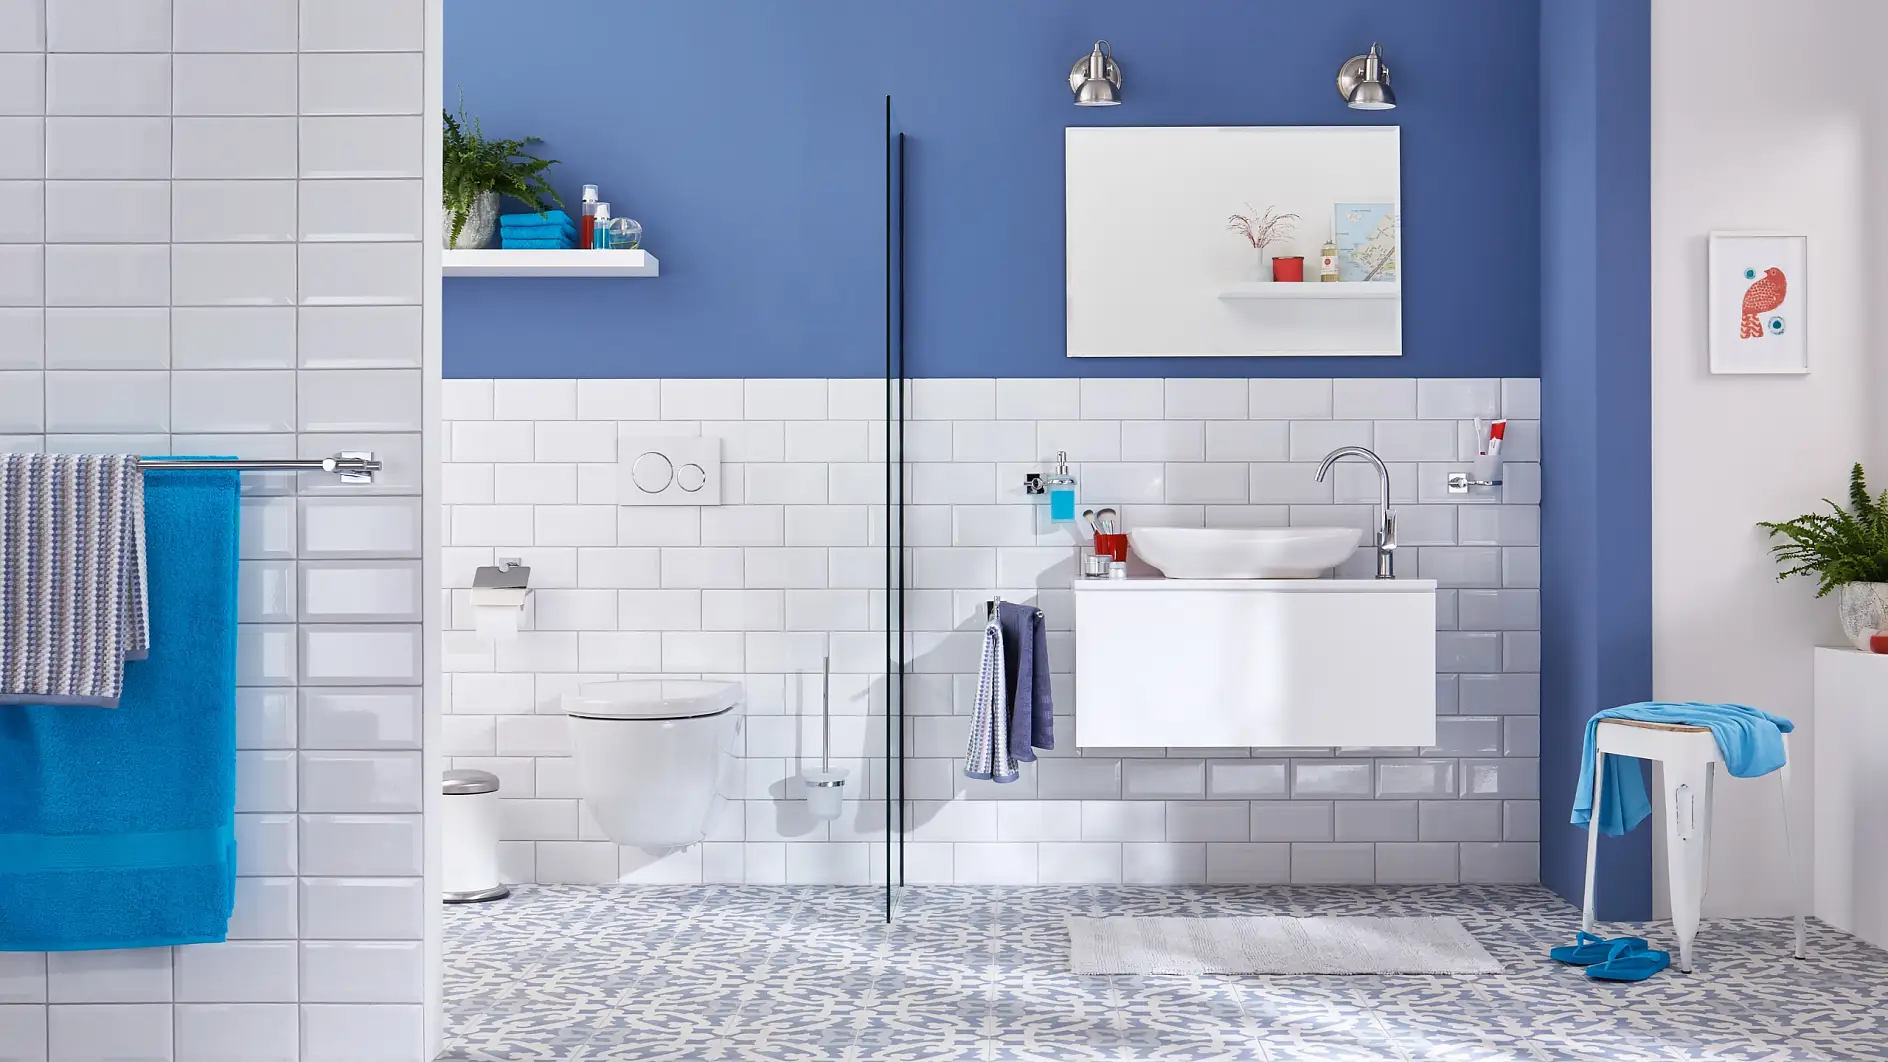 Beauty meets confidence to cover your bathroom needs.